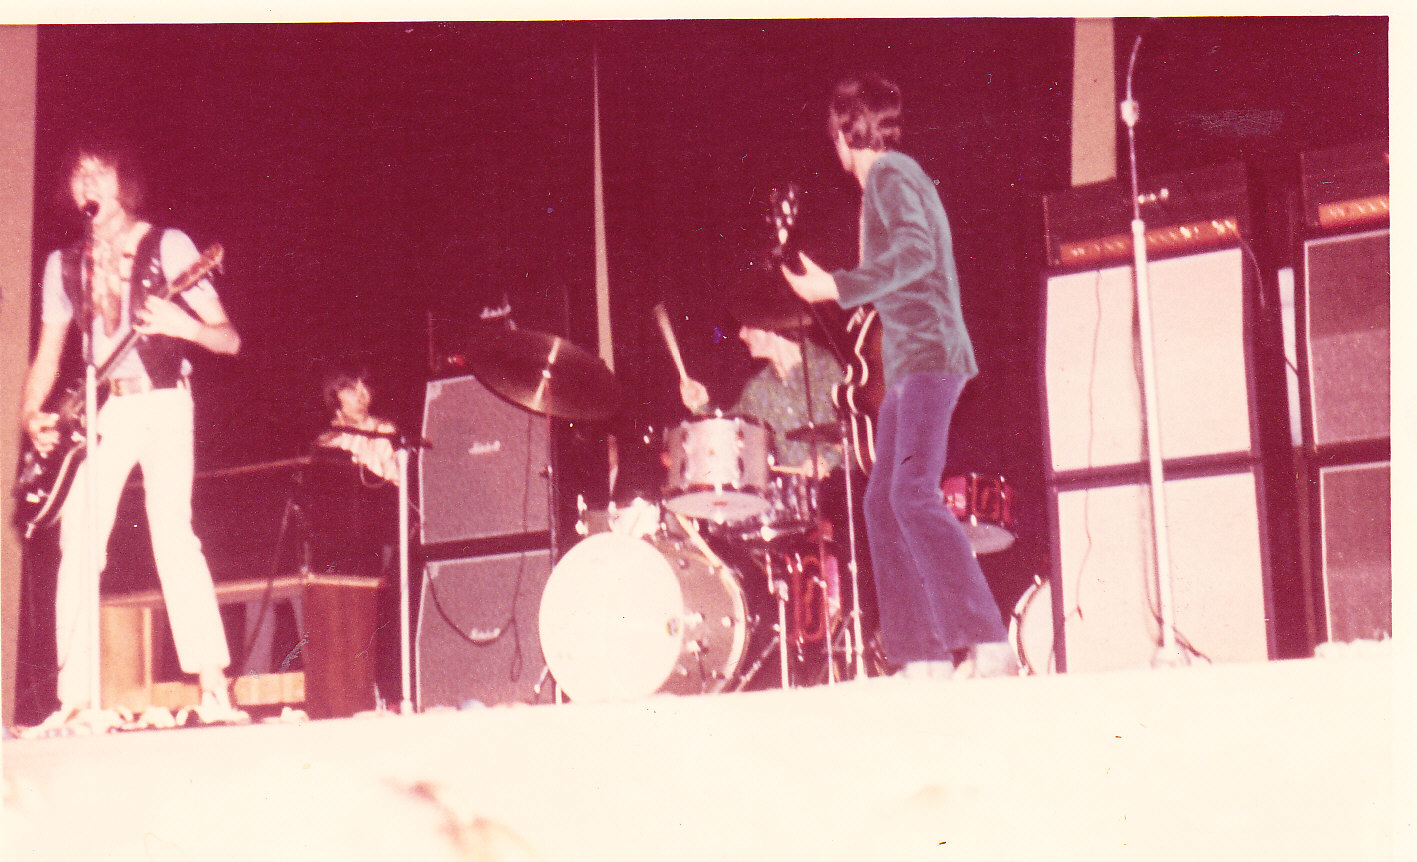 Small faces in their Adelaide concert.